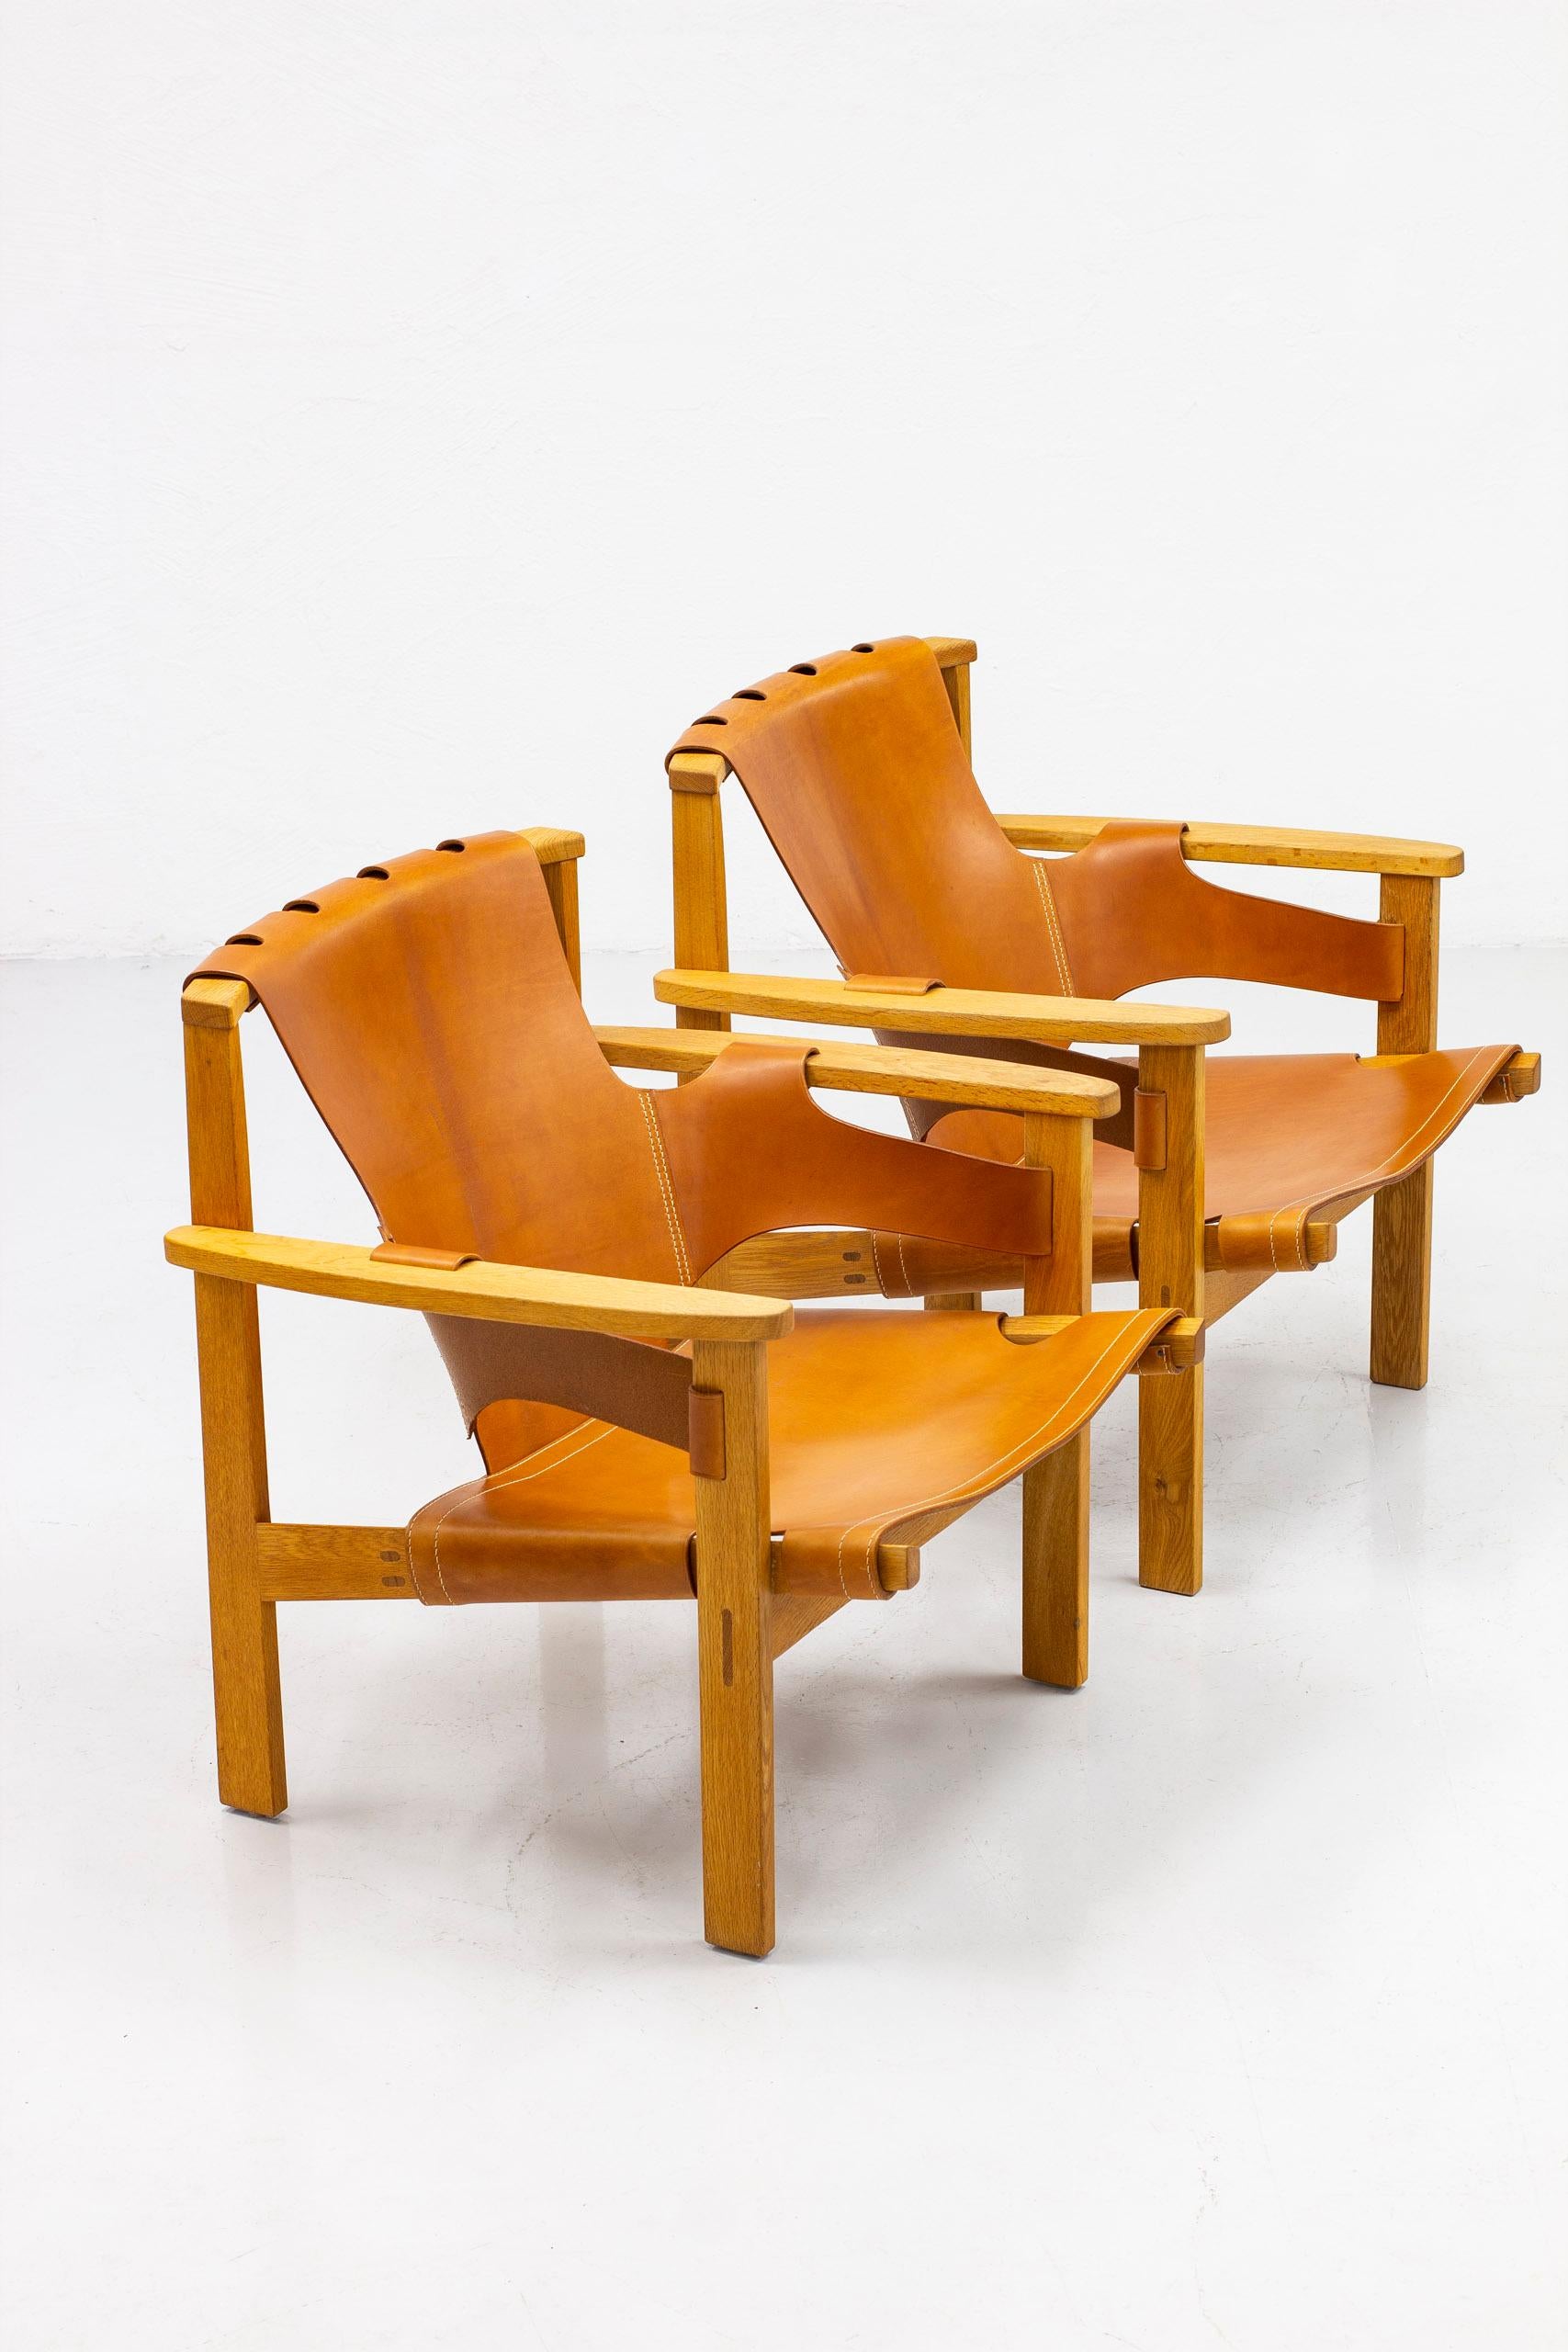 Swedish Lounge Chairs in Oak and Leather by Carl-Axel Acking, Nk, Nordiska Kompaniet